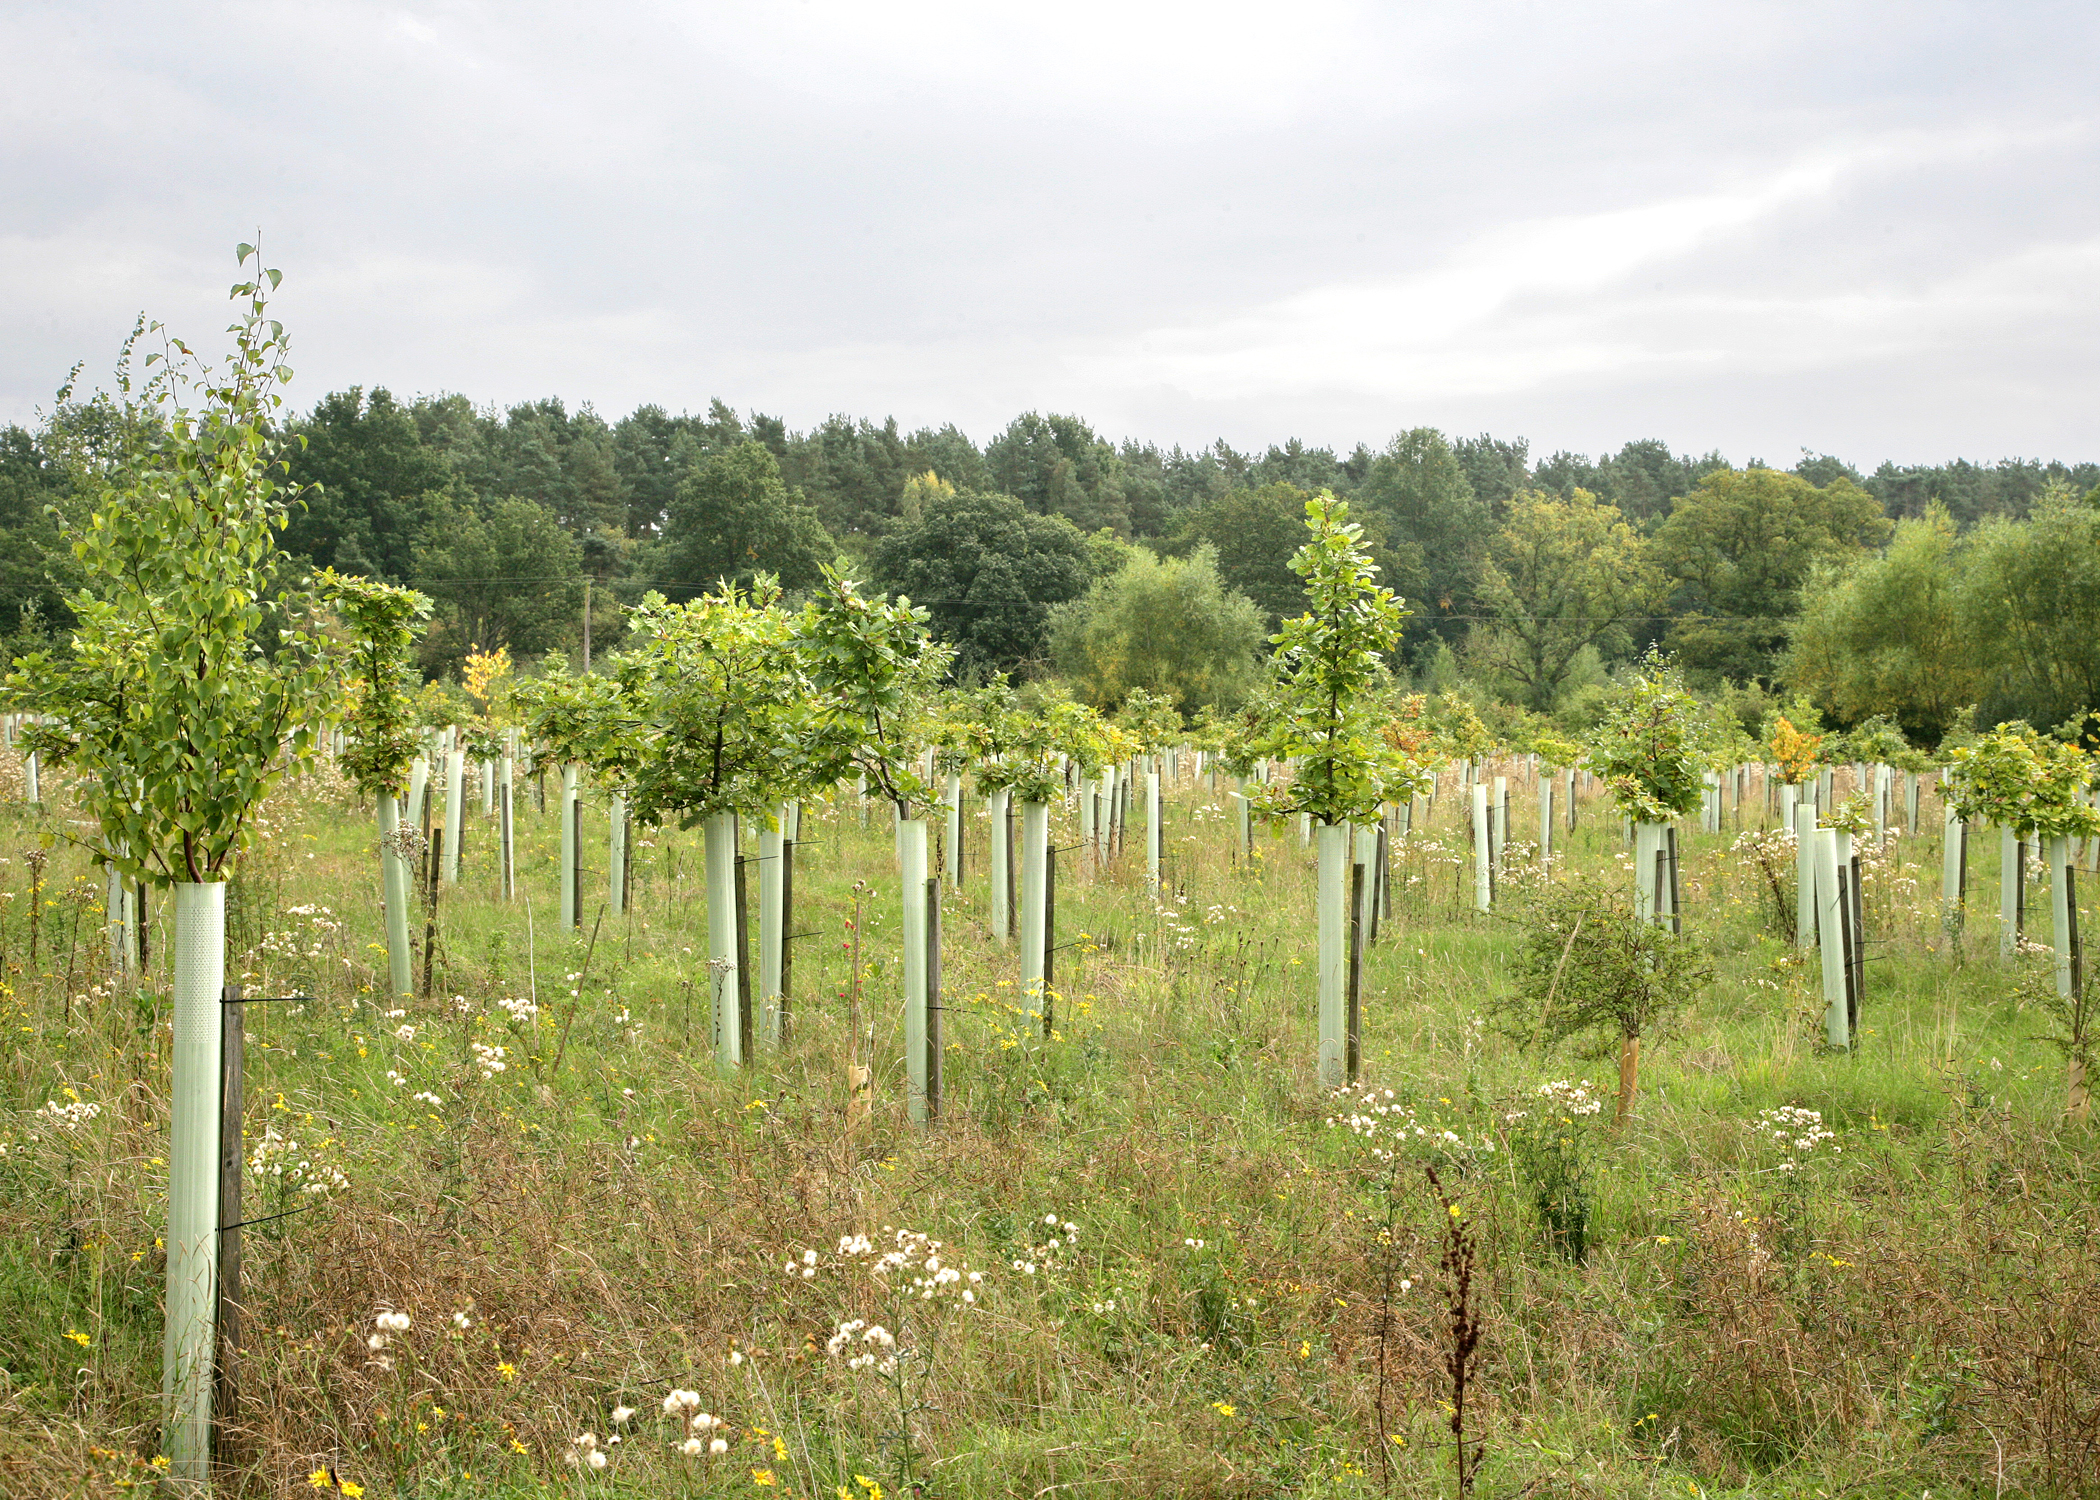 Some young trees planted in the Forest in tubes in front of some established woodland